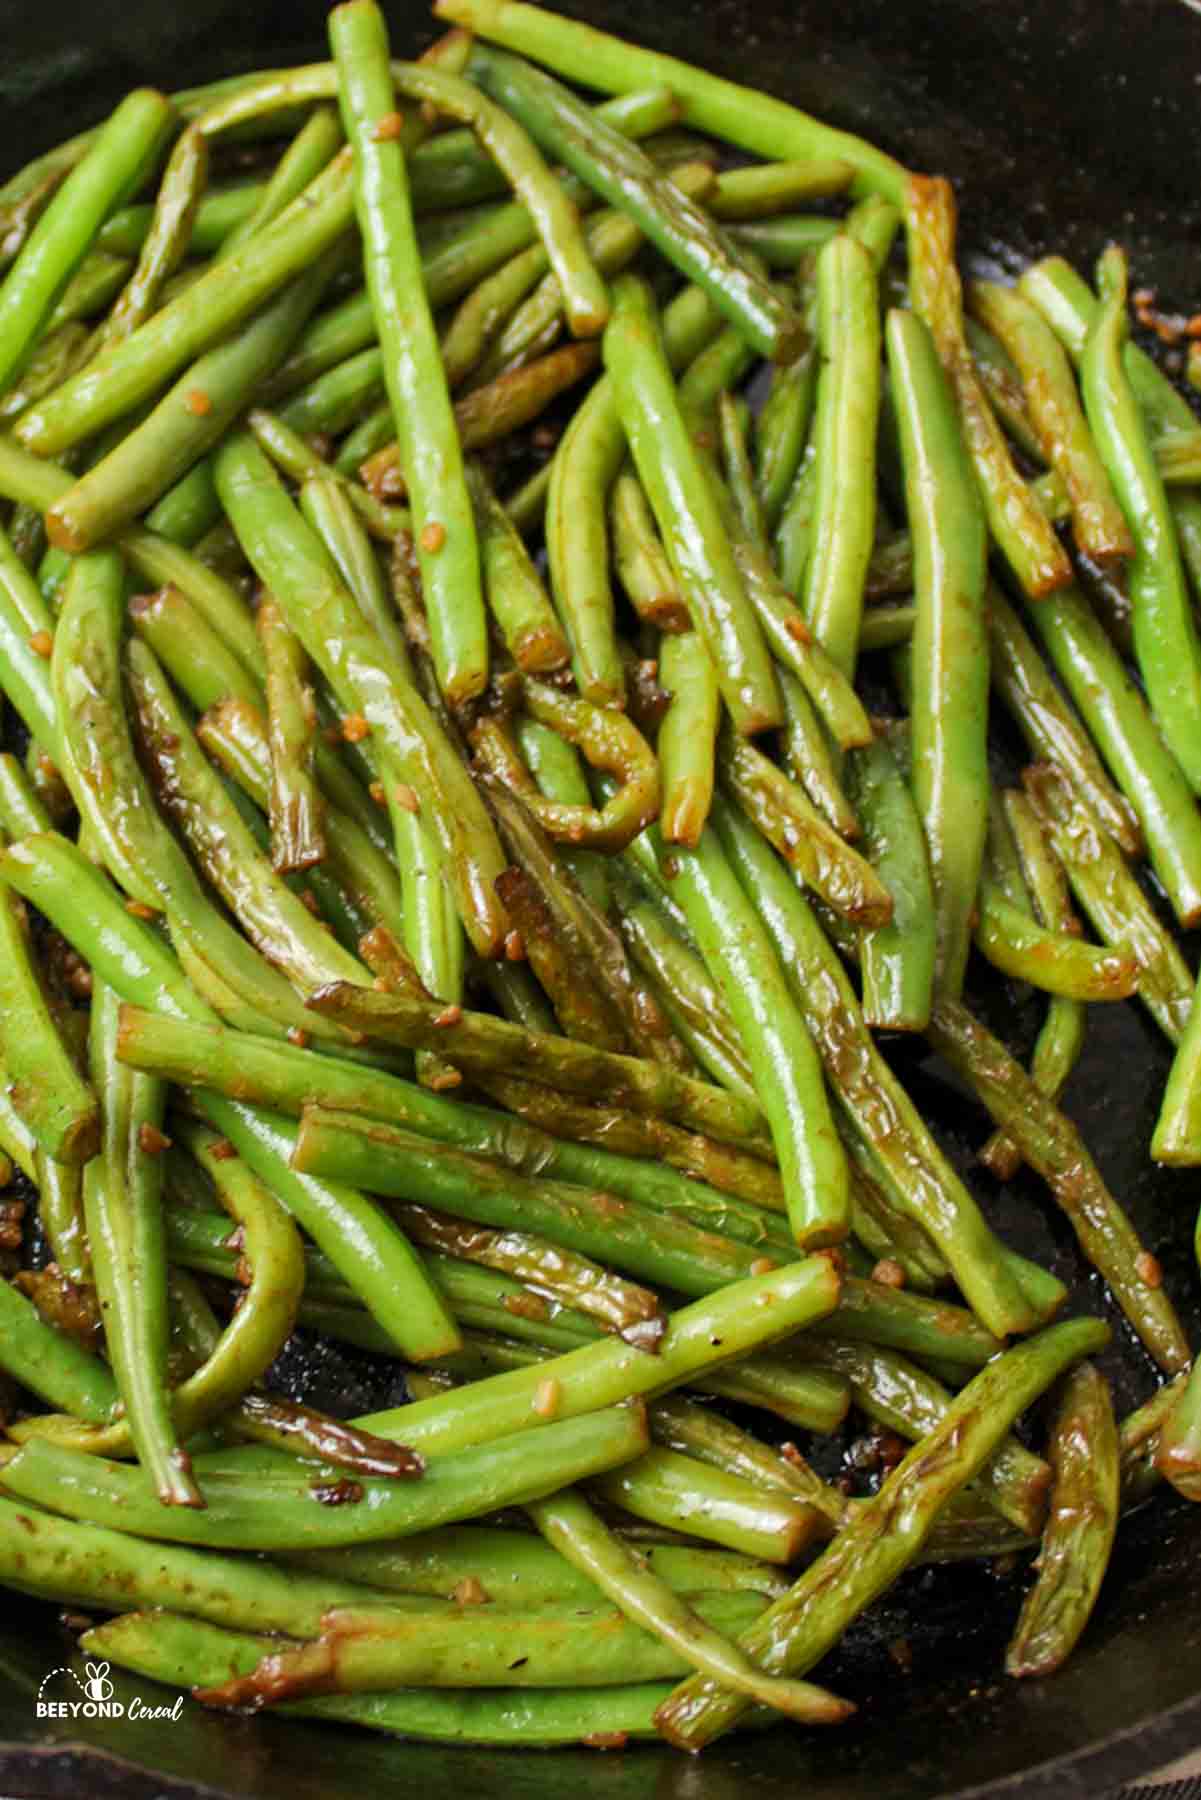 an upclose view of cooked green beans in a cast iron skillet